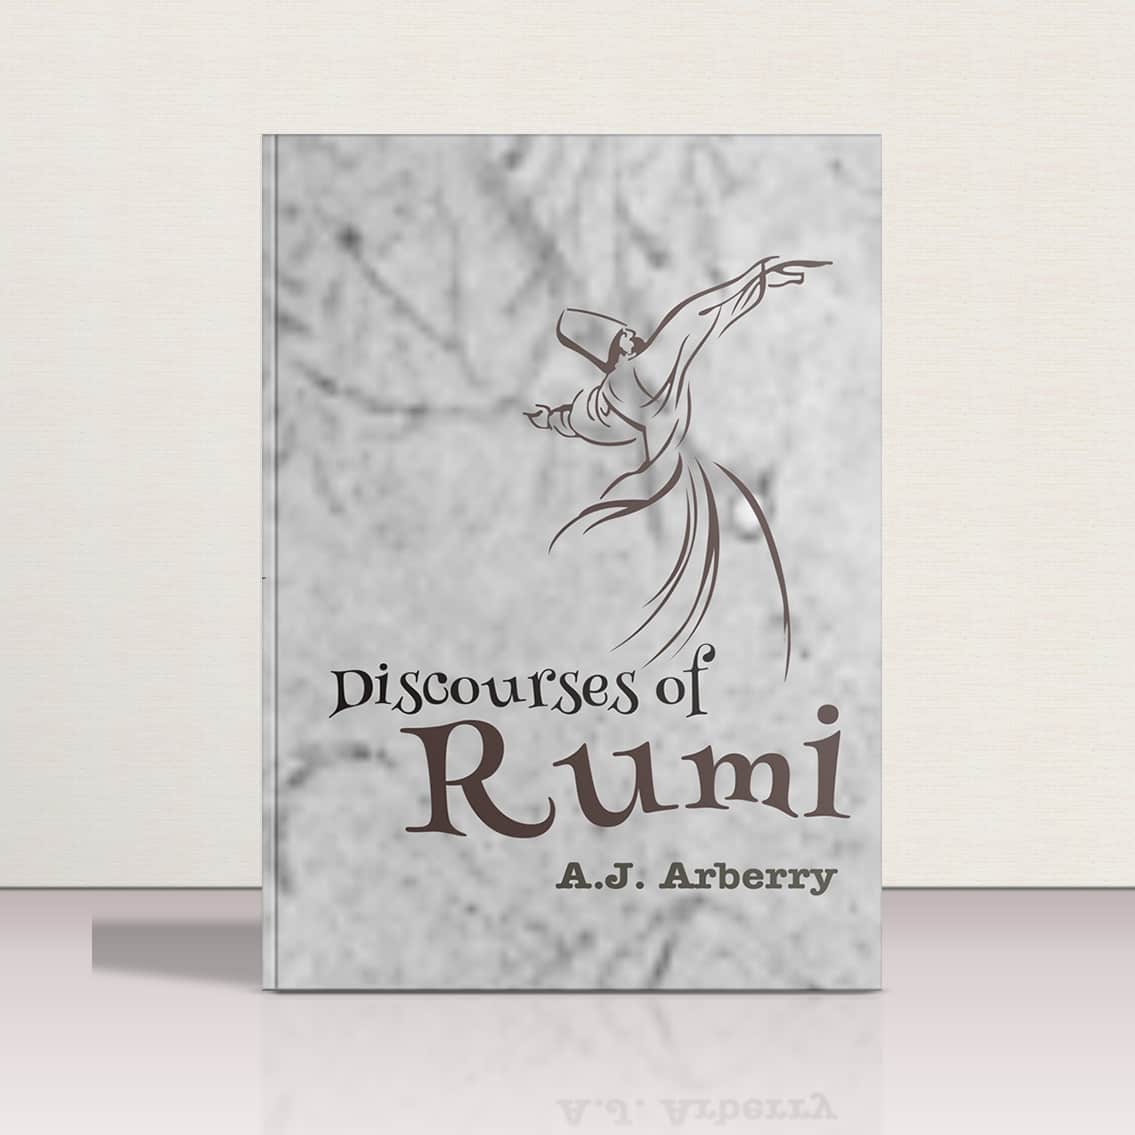 Discourses of Rumi by A.J.Arberry